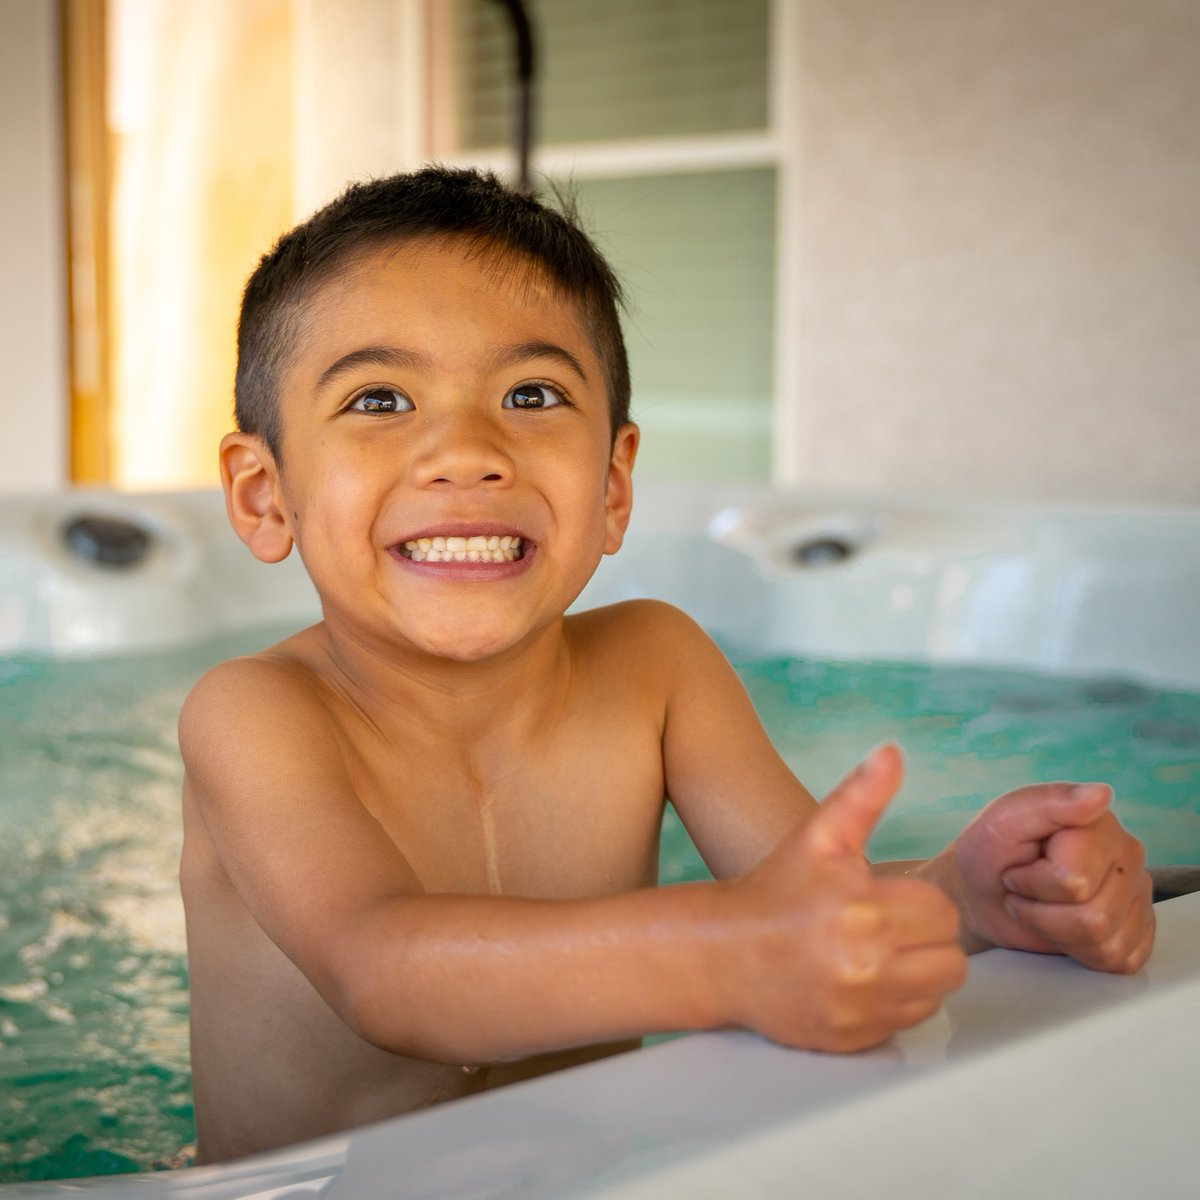 Anthony has had three open-heart surgeries. Water gives him feelings of comfort and safety so his wish to have a hot tub was more than heart-warming. It helped him believe in brighter days ahead! Celebrate #HeartOfAWish this #AmericanHeartMonth by visiting wish.org/heart